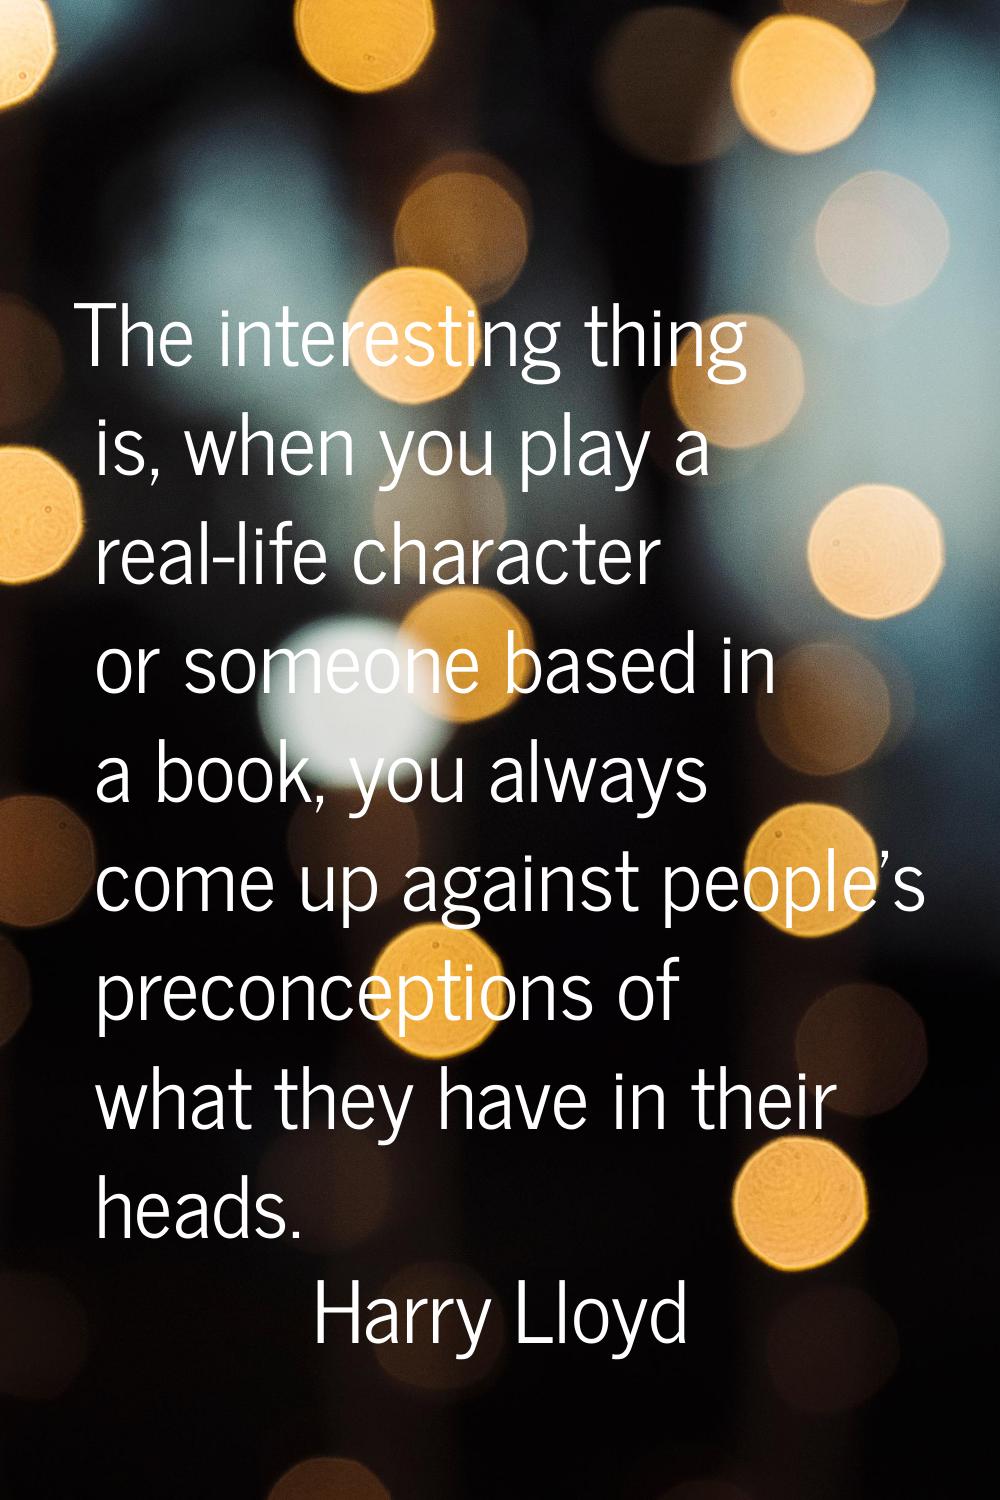 The interesting thing is, when you play a real-life character or someone based in a book, you alway